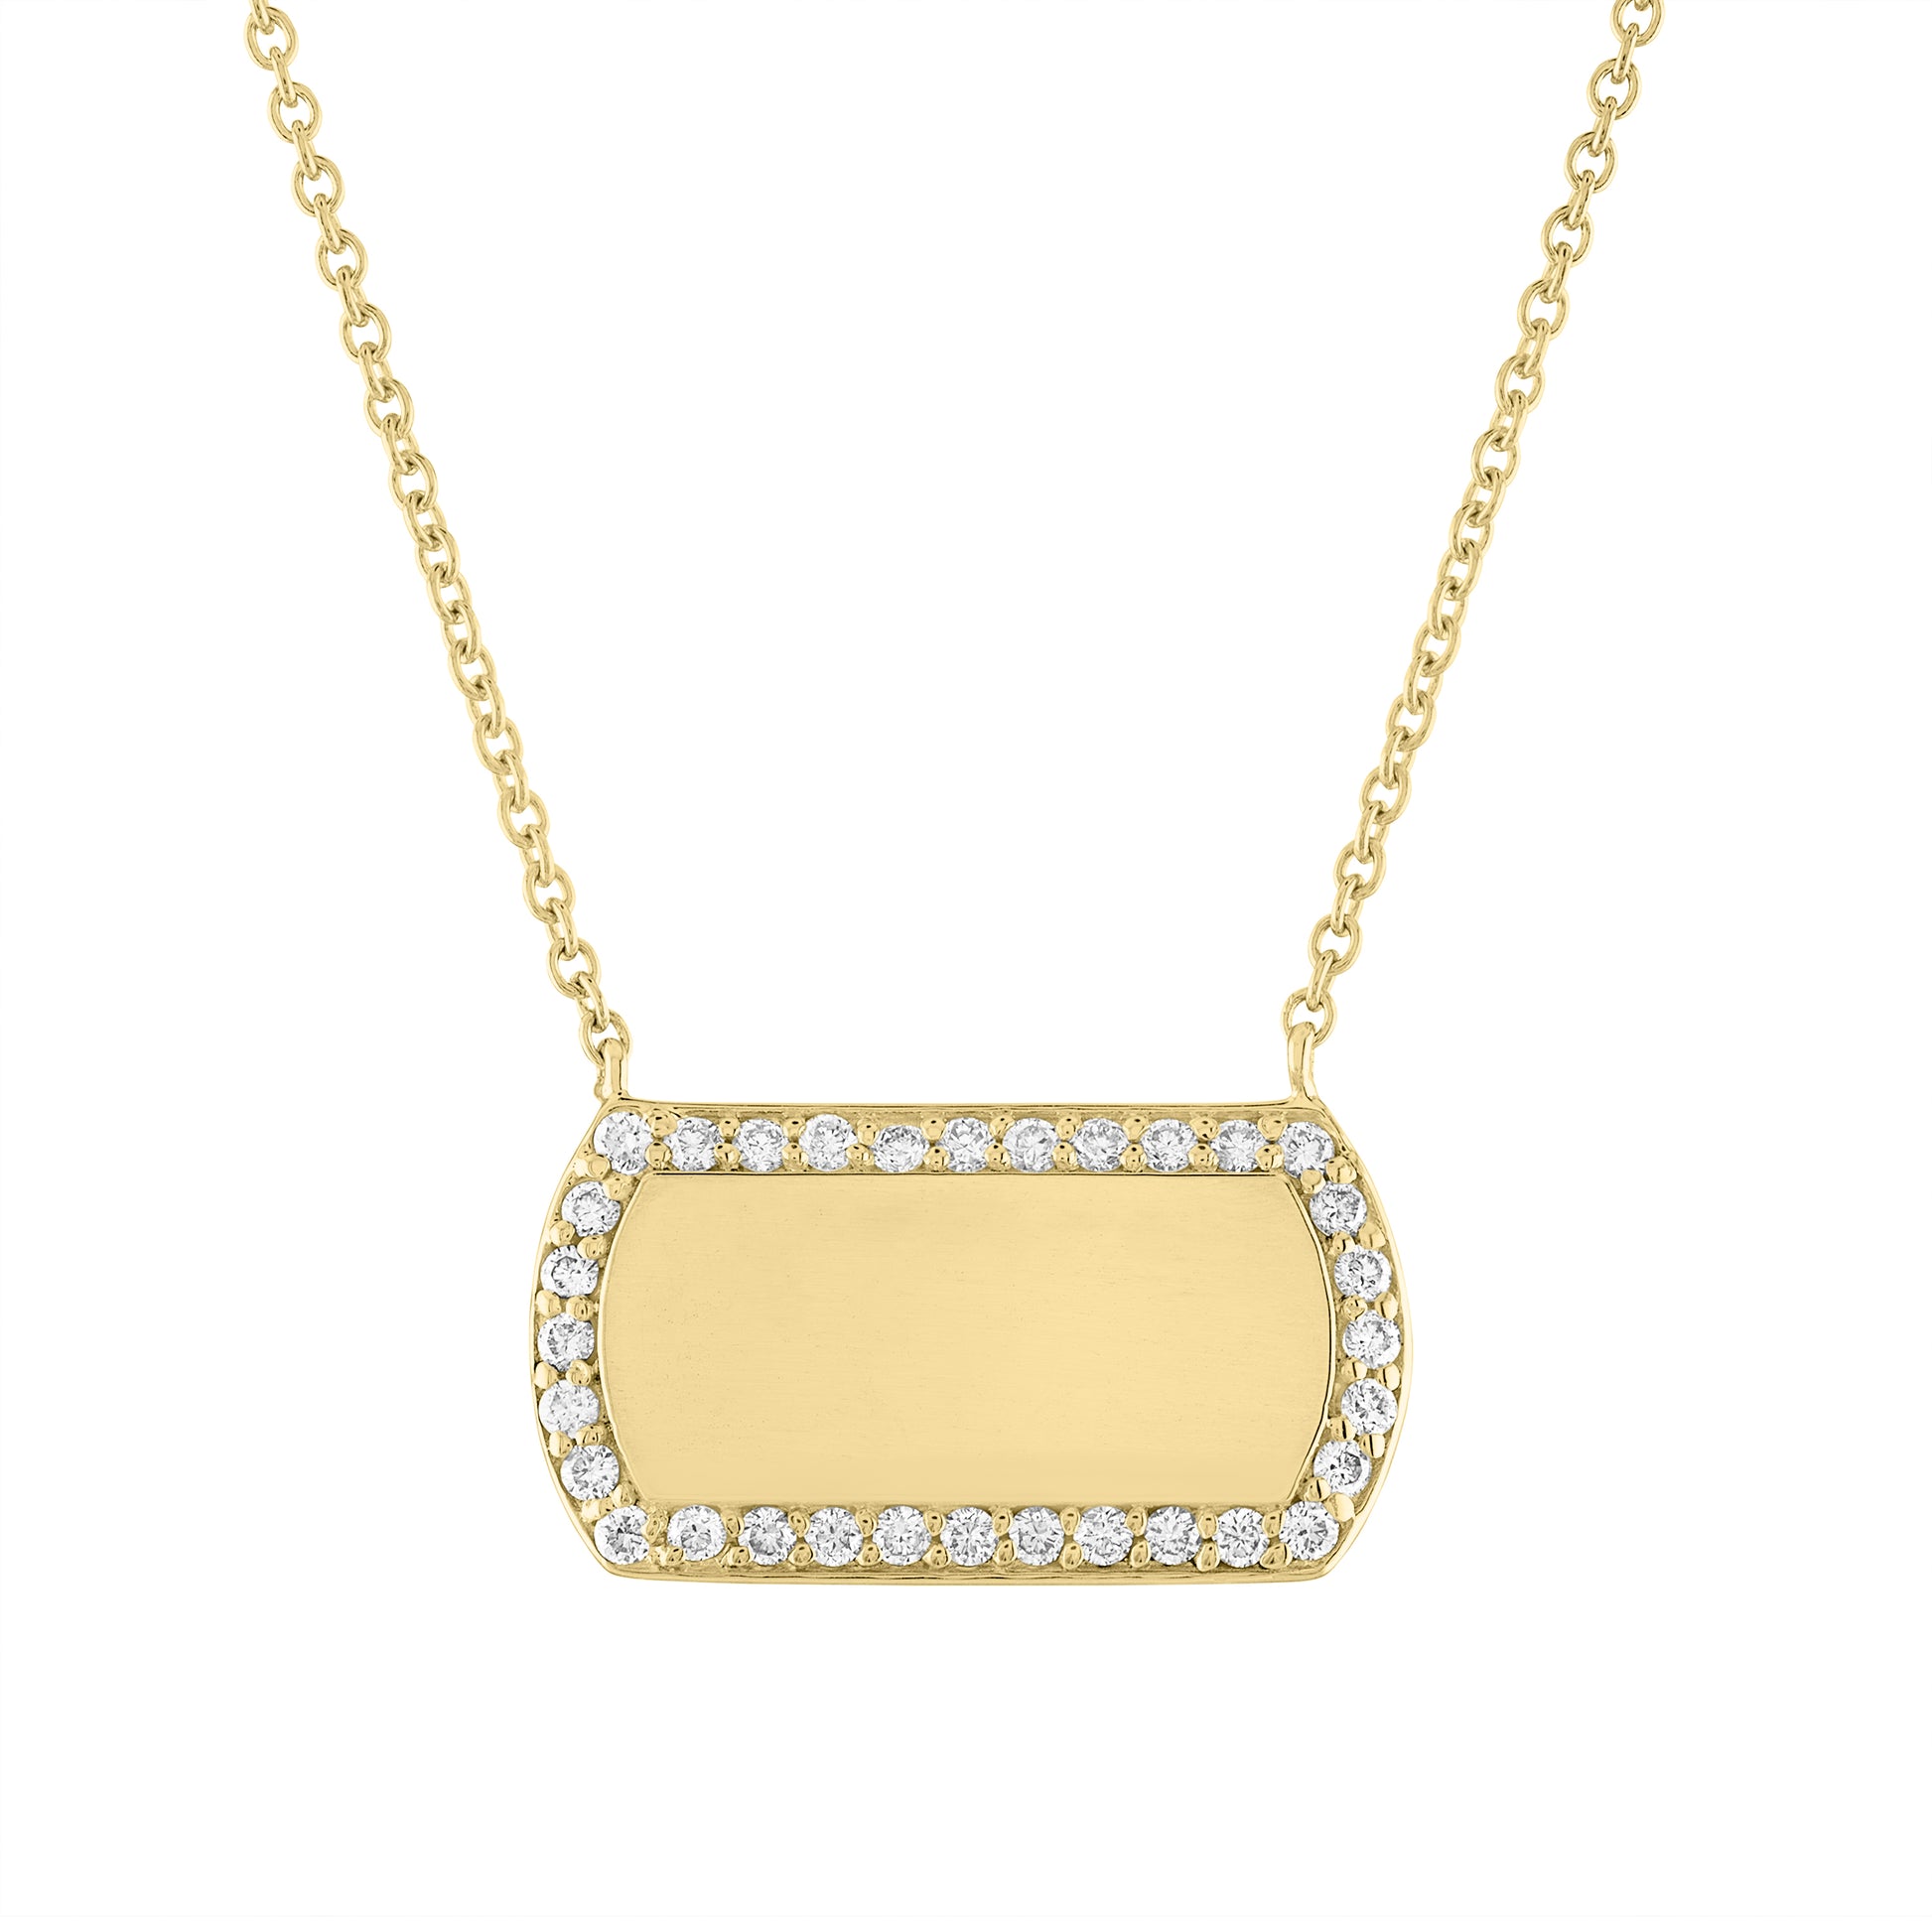 Yellow gold horizontal dogtag necklace with round diamonds along the border. 